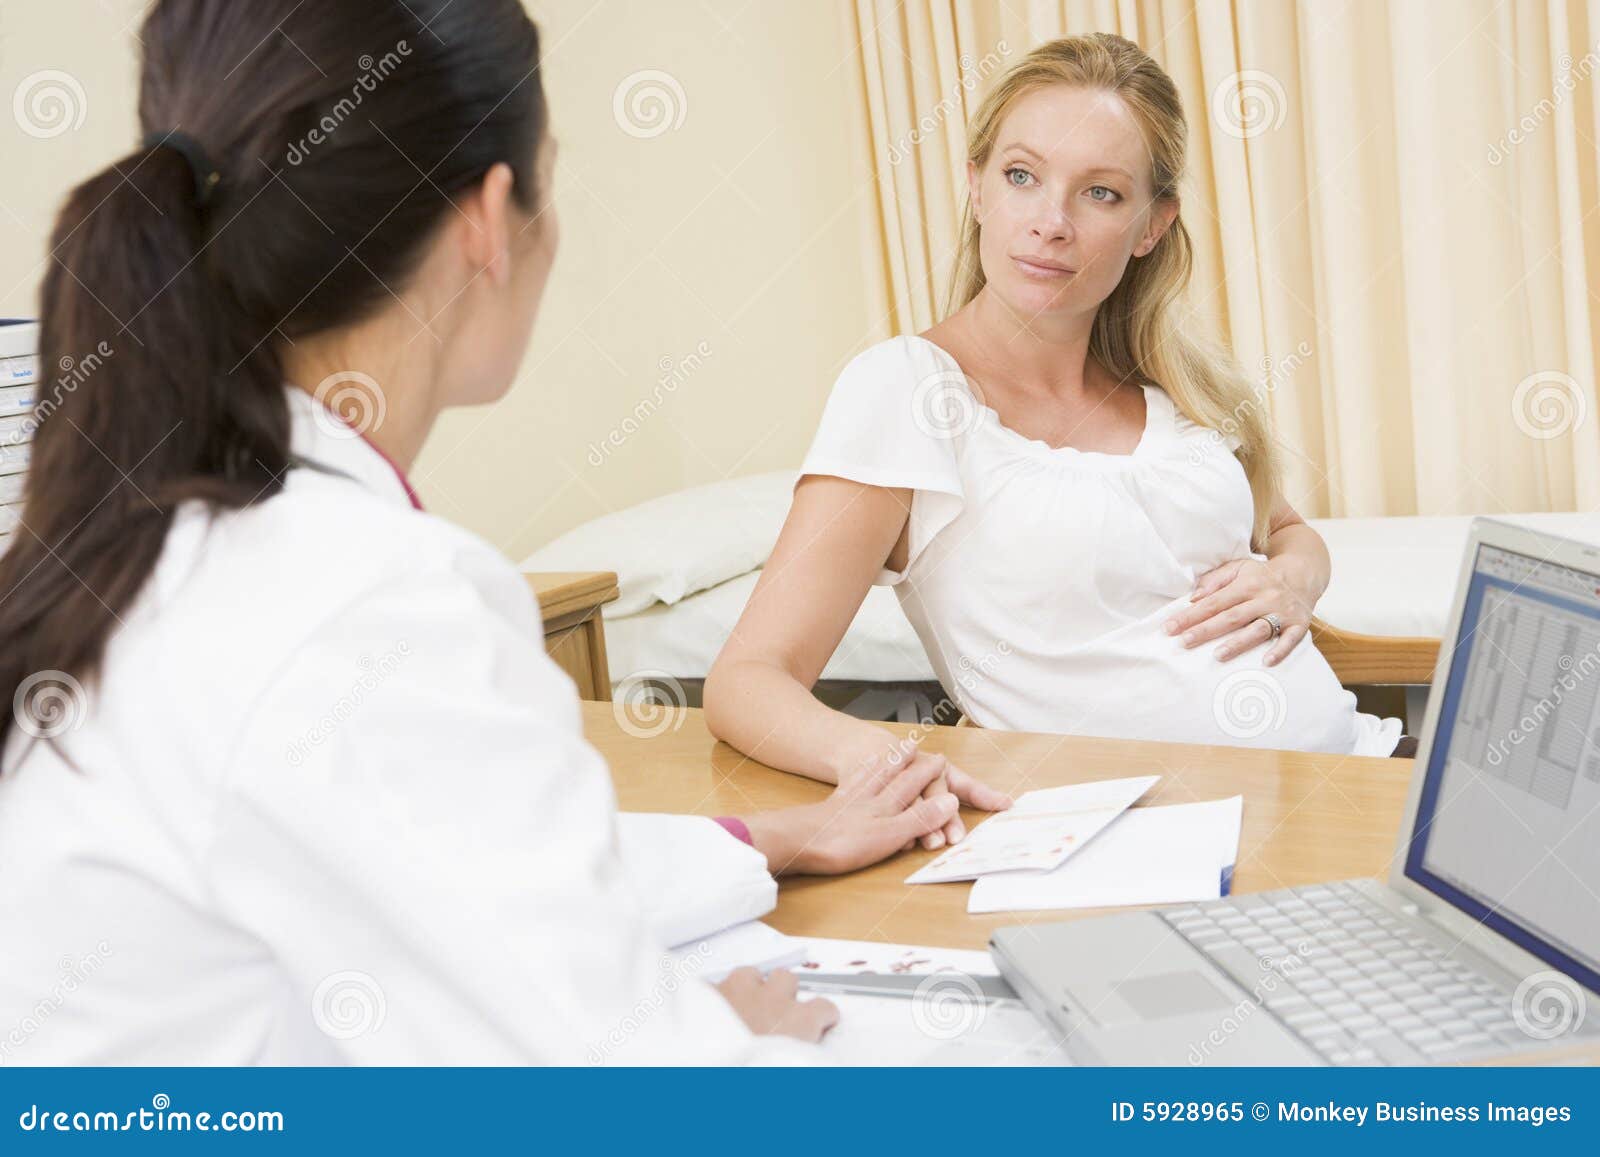 doctor with laptop and pregnant woman